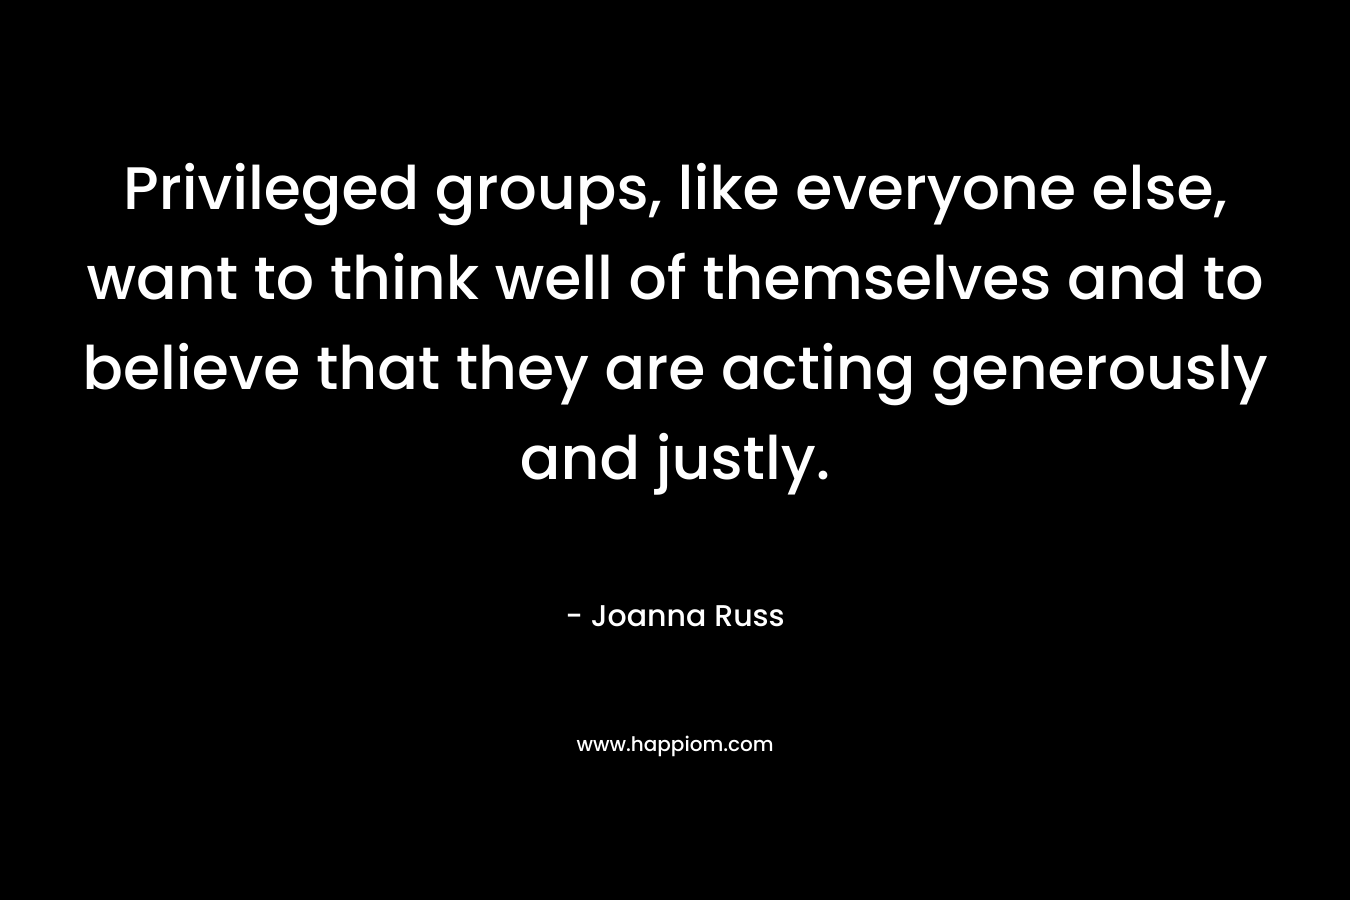 Privileged groups, like everyone else, want to think well of themselves and to believe that they are acting generously and justly. – Joanna Russ